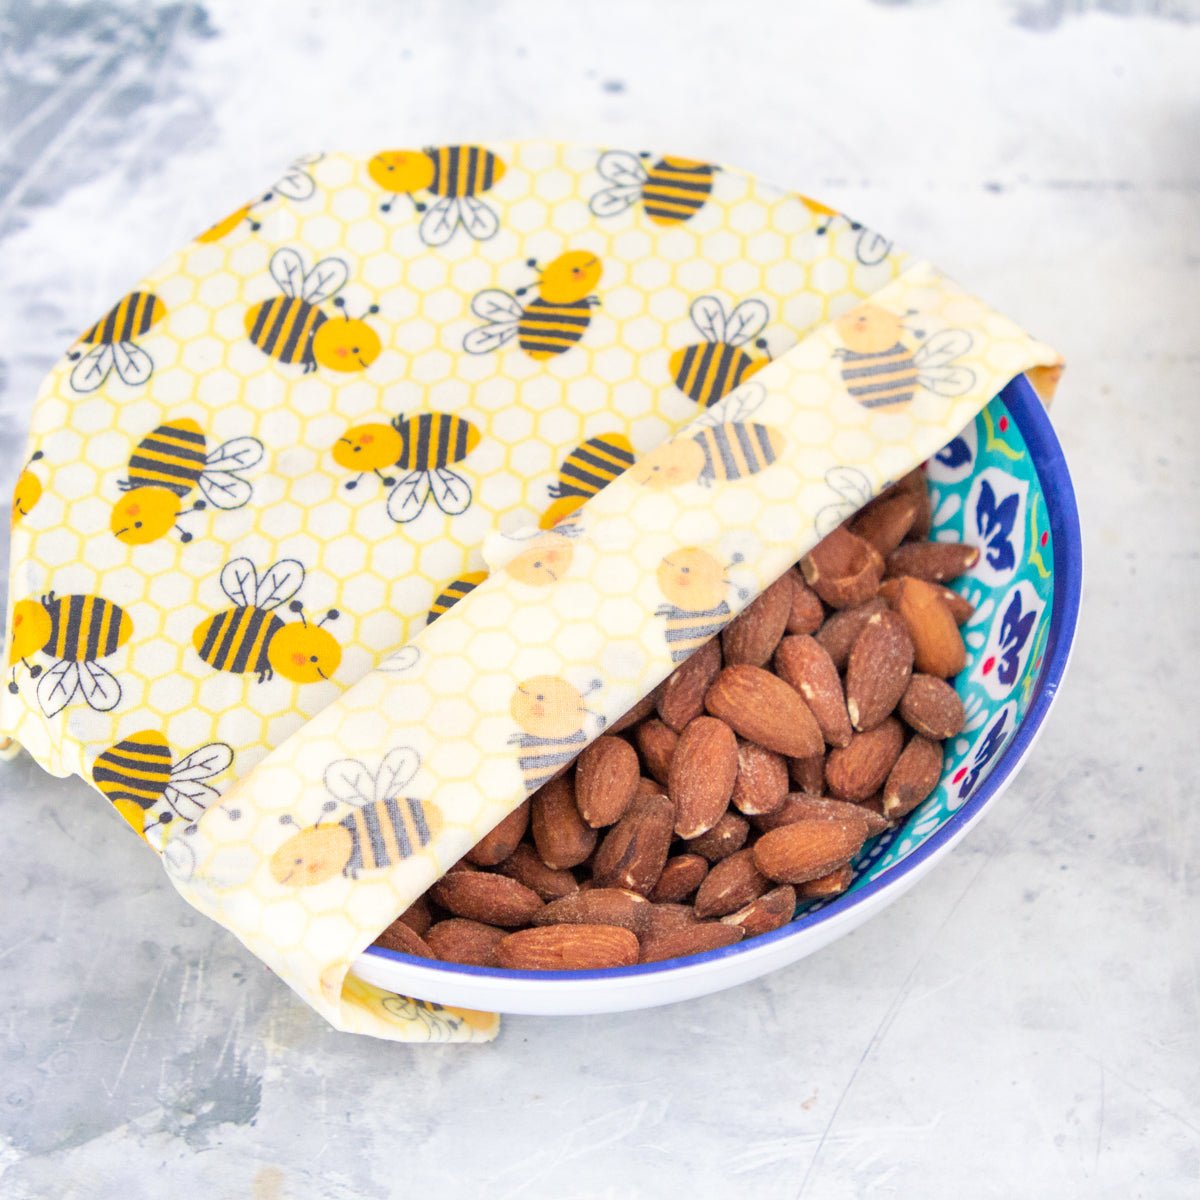 Buy SUPERBEE Beeswax Wrap for Food, Set of 3 Bees Wax Wraps